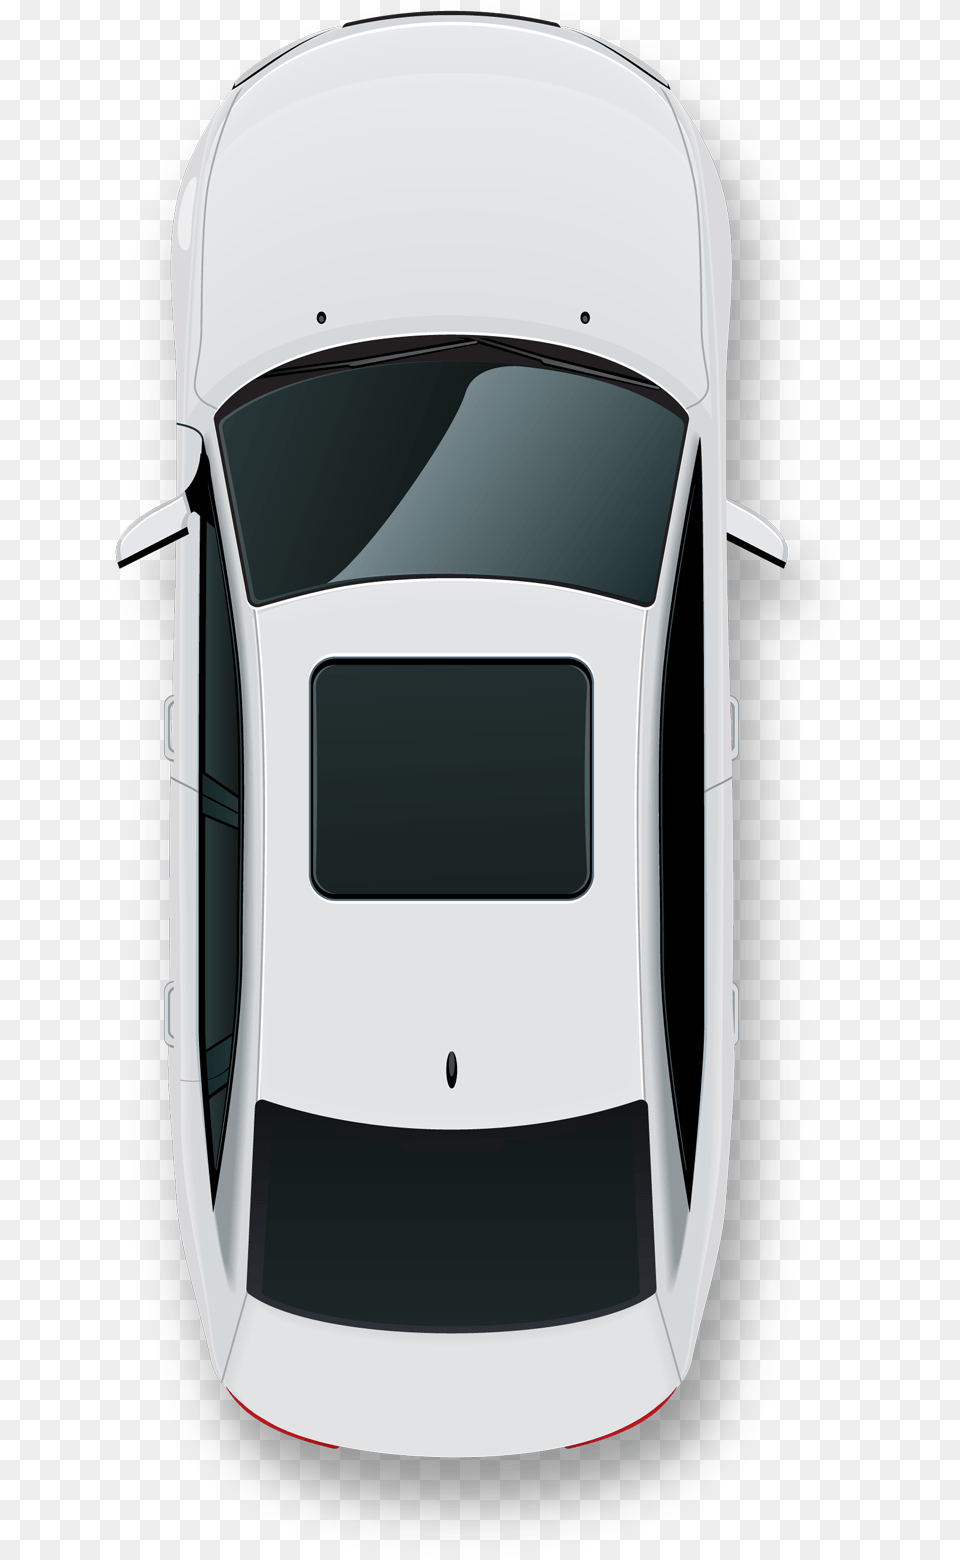 Top View Of Car Car From Top Svg, Bag, Cushion, Home Decor, Helmet Png